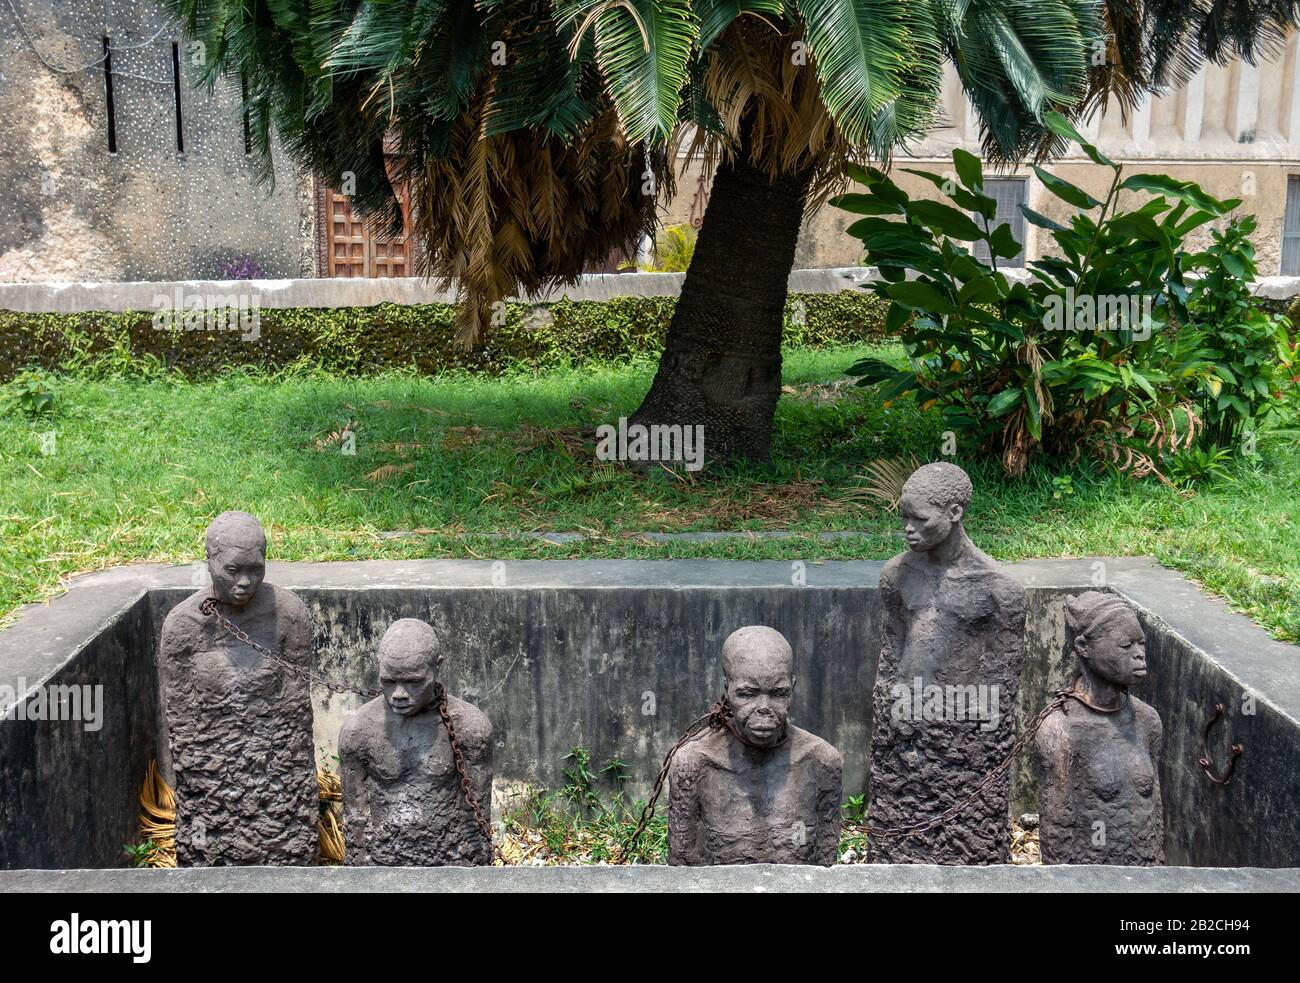 Image From The Former Slave Market Museum In Zanzibar City And Stone Town The Main City On The